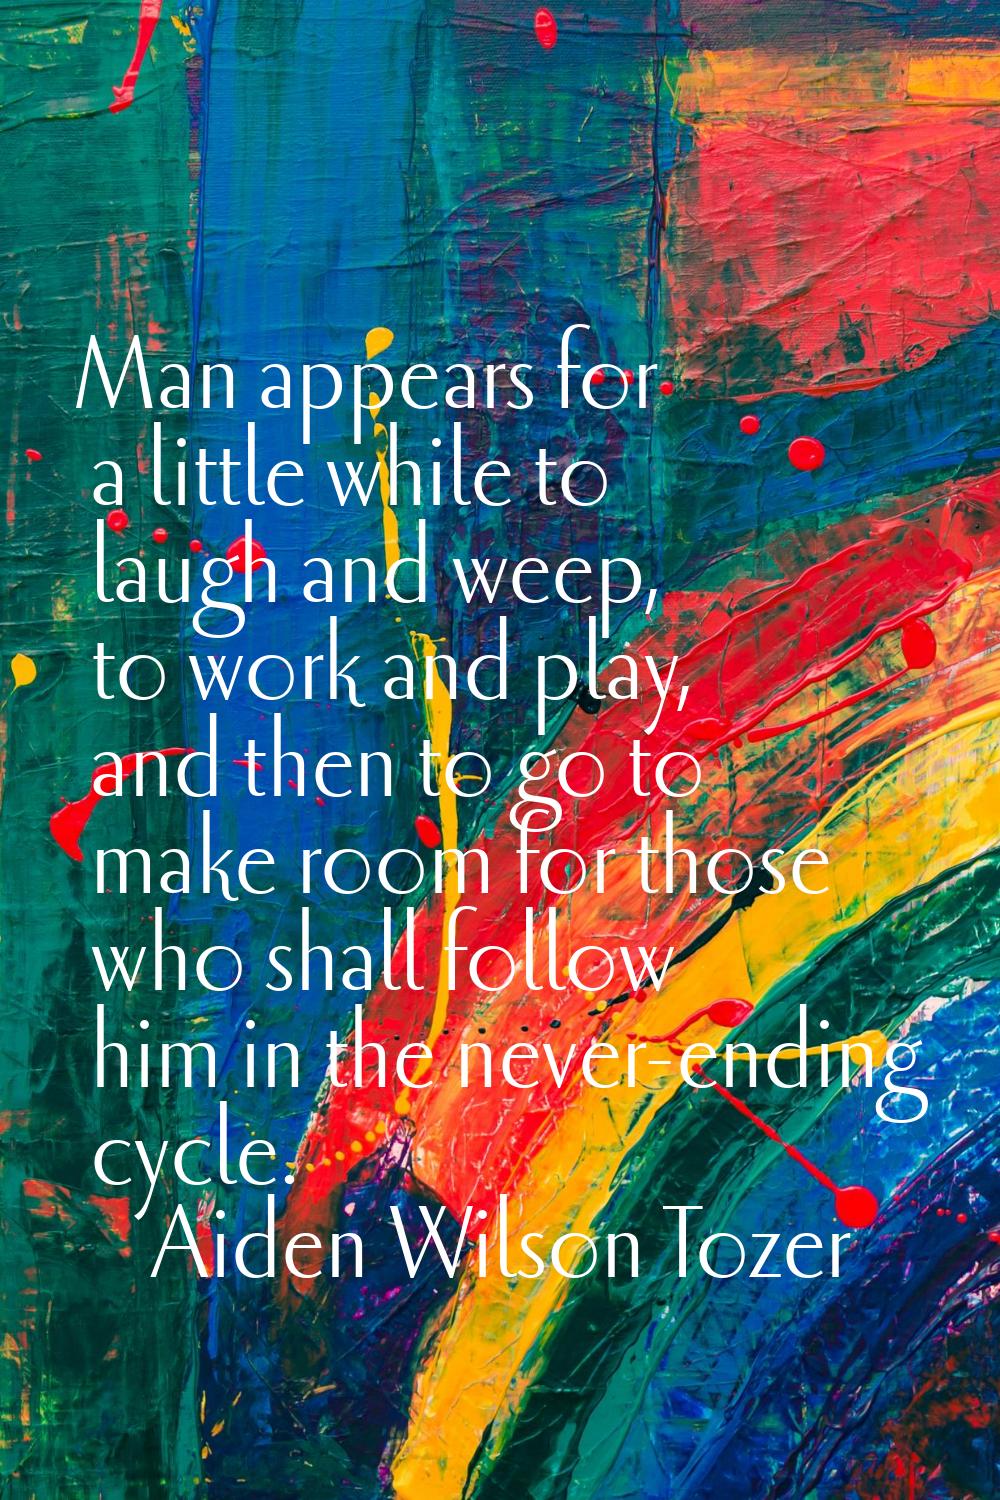 Man appears for a little while to laugh and weep, to work and play, and then to go to make room for